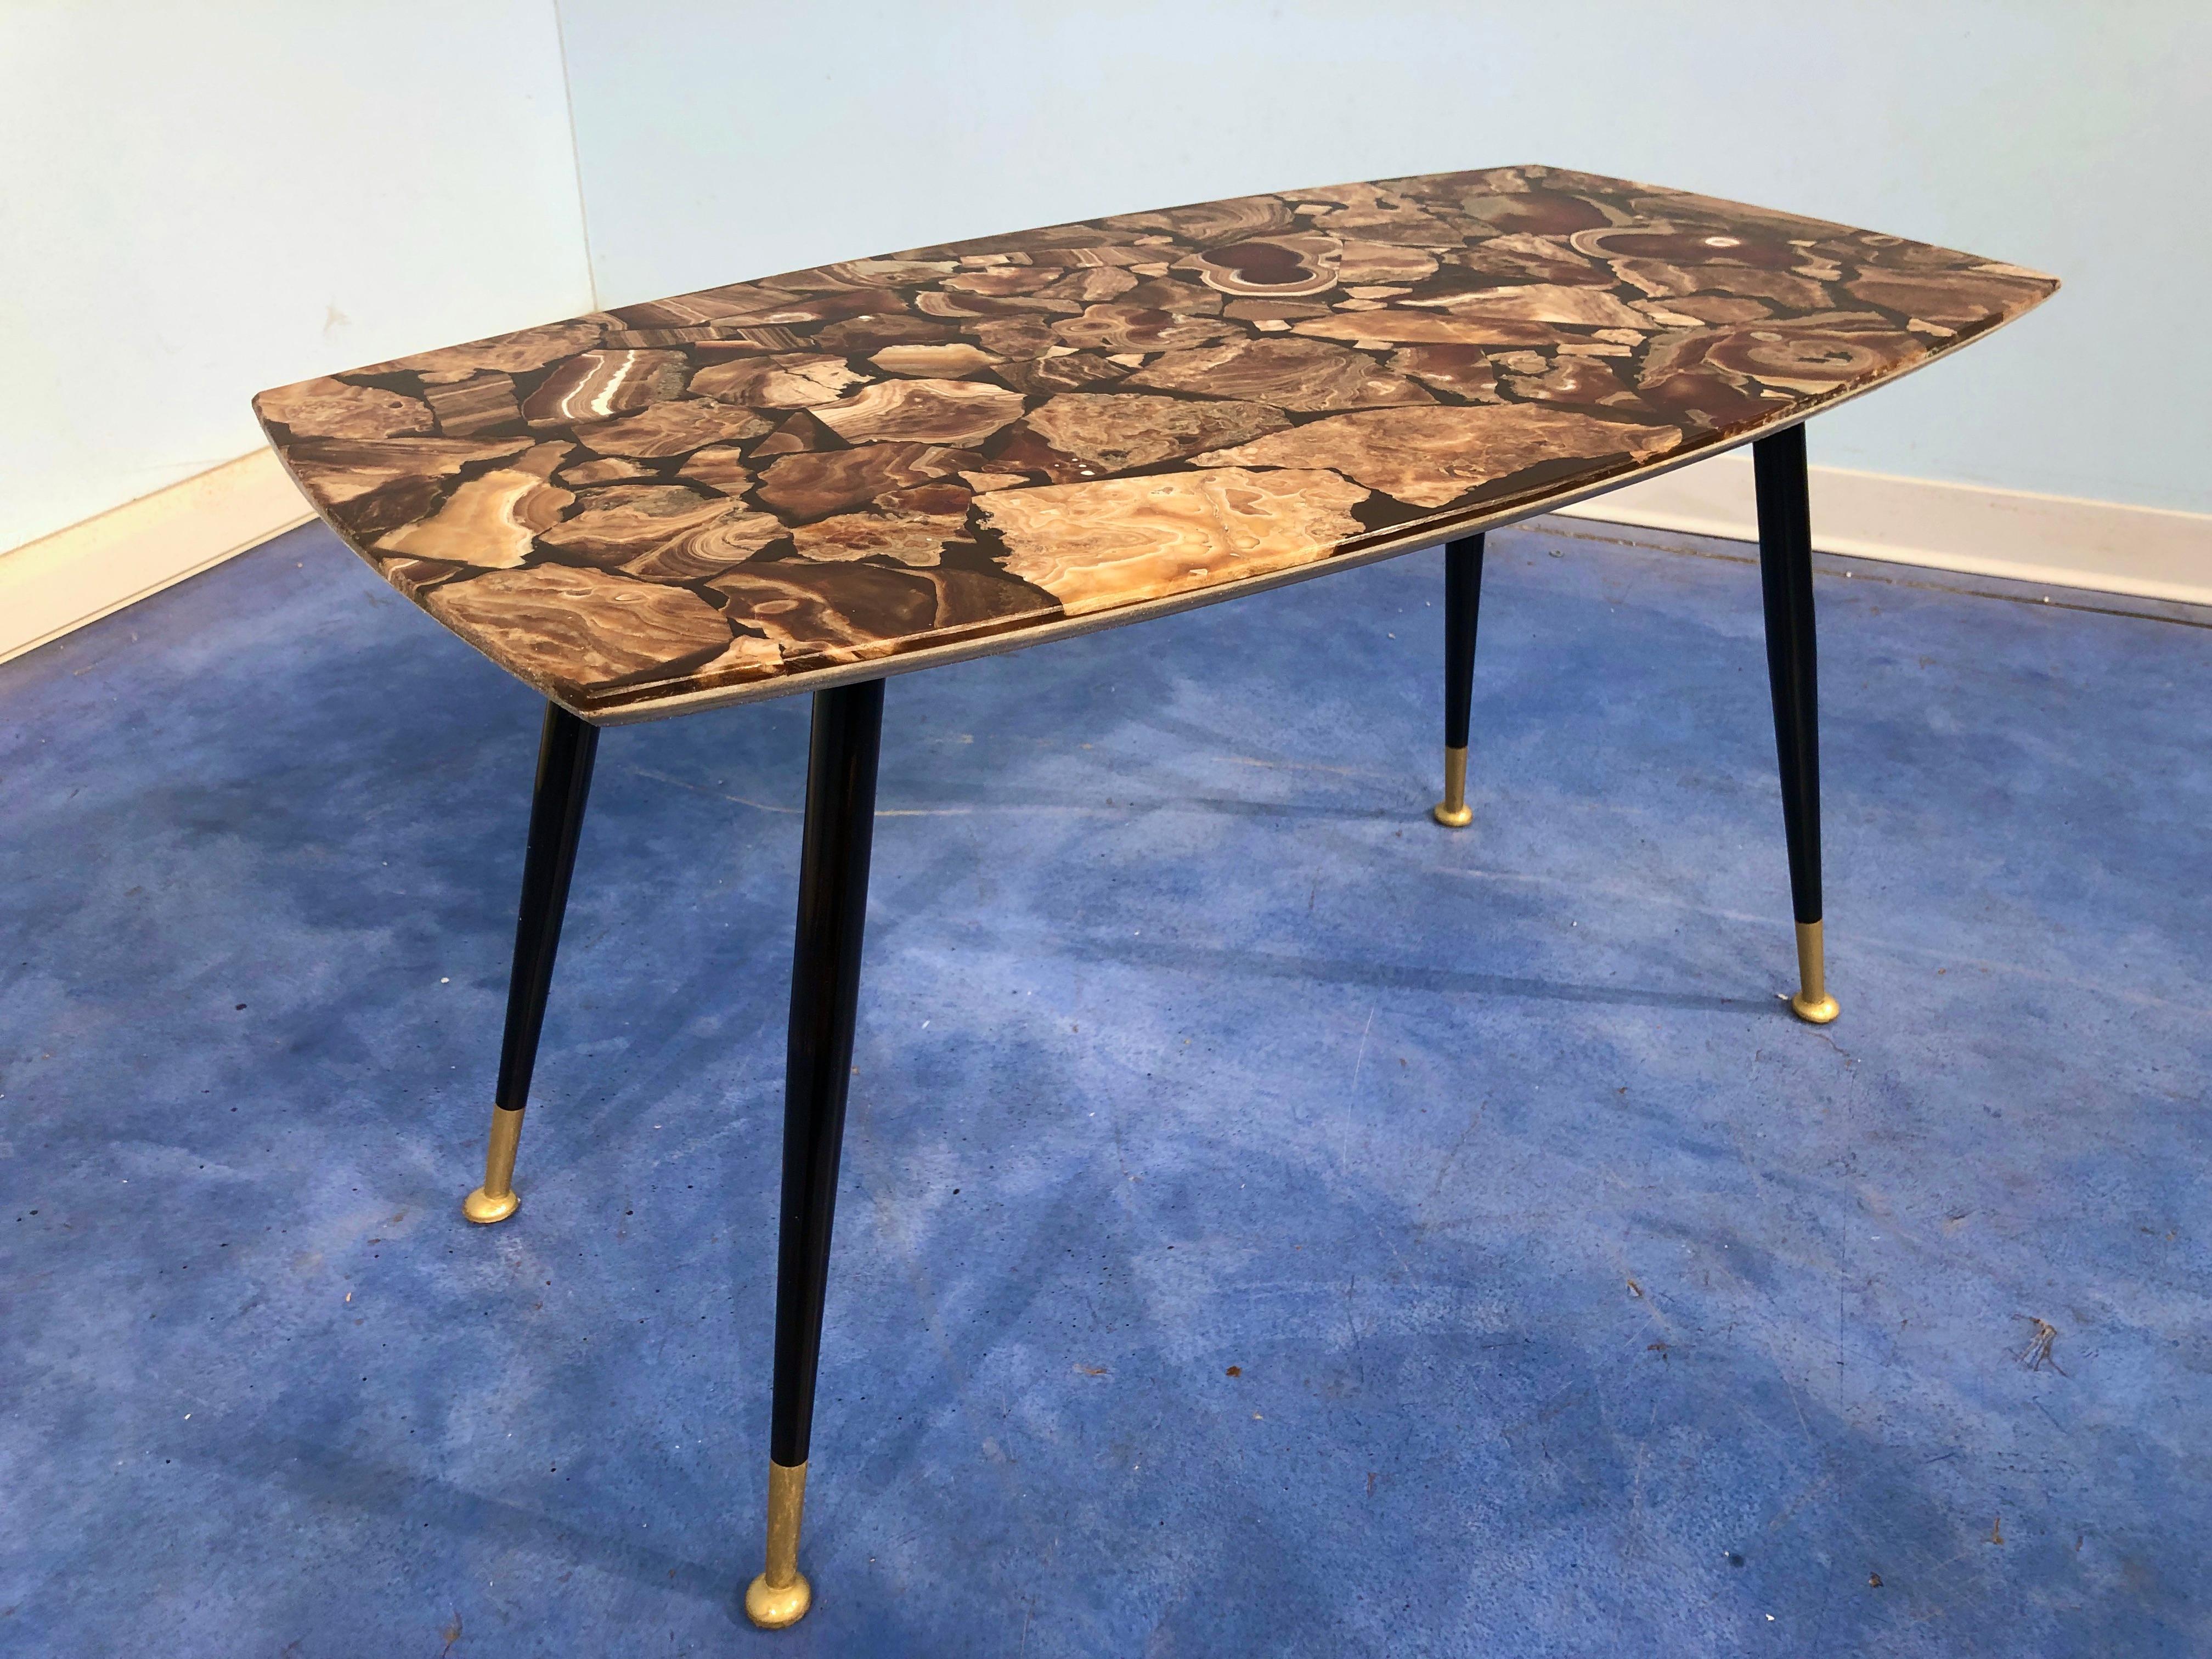 Italian Midcentury Mosaic Marble Coffee Table, 1950 For Sale 5